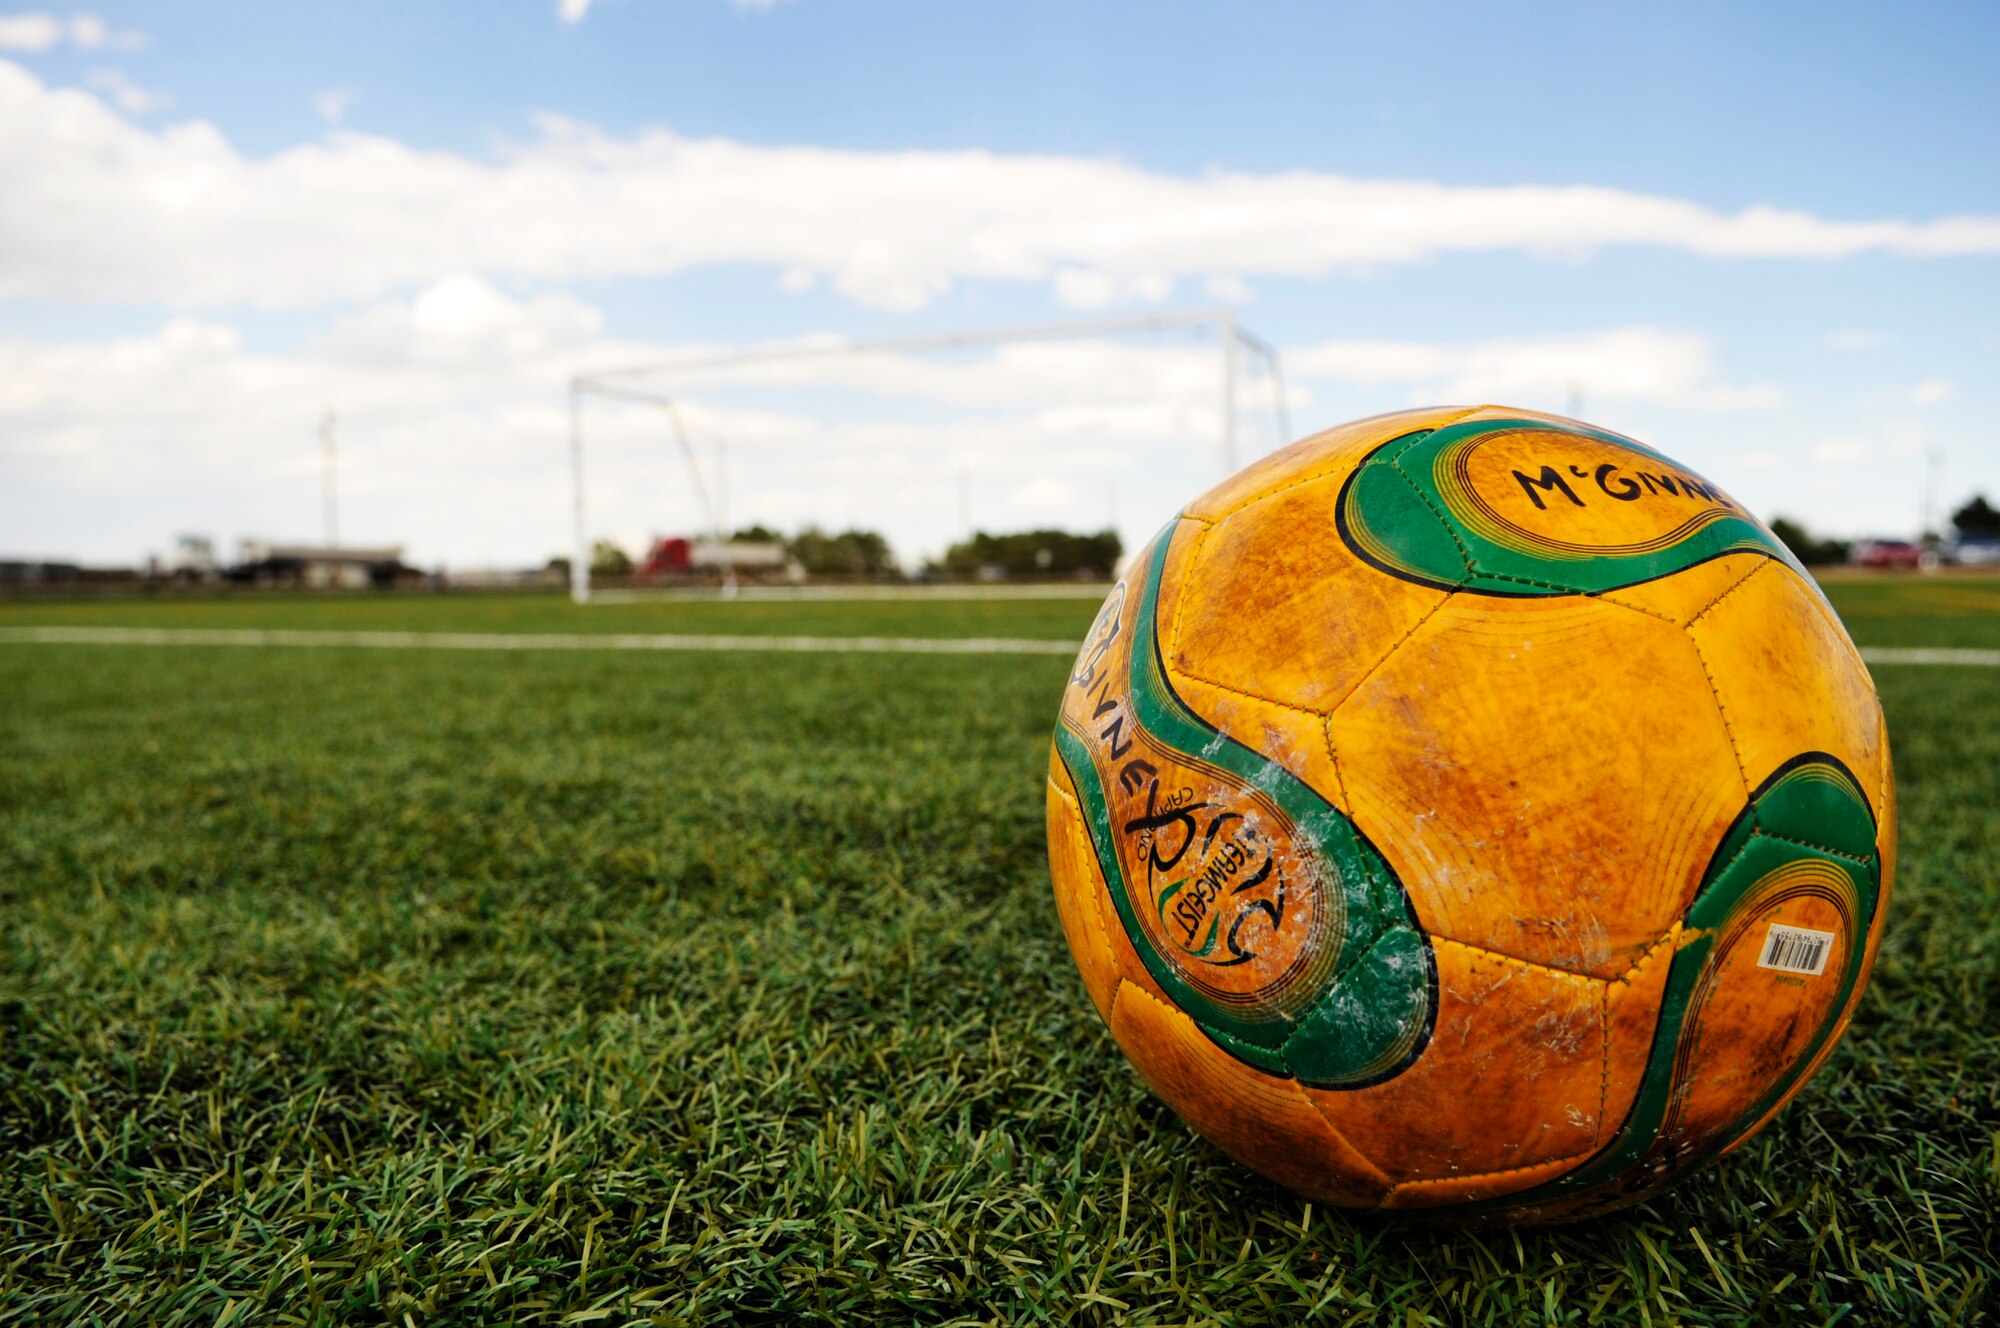 BUCKLEY AIR FORCE BASE, Colo. -- A ball sits on a soccer field before a practice scrimmage at Buckley Air Force Base. Teams from each squadron will compete in the upcoming season. (U.S. photo by Airman 1st Class Paul Labbe)